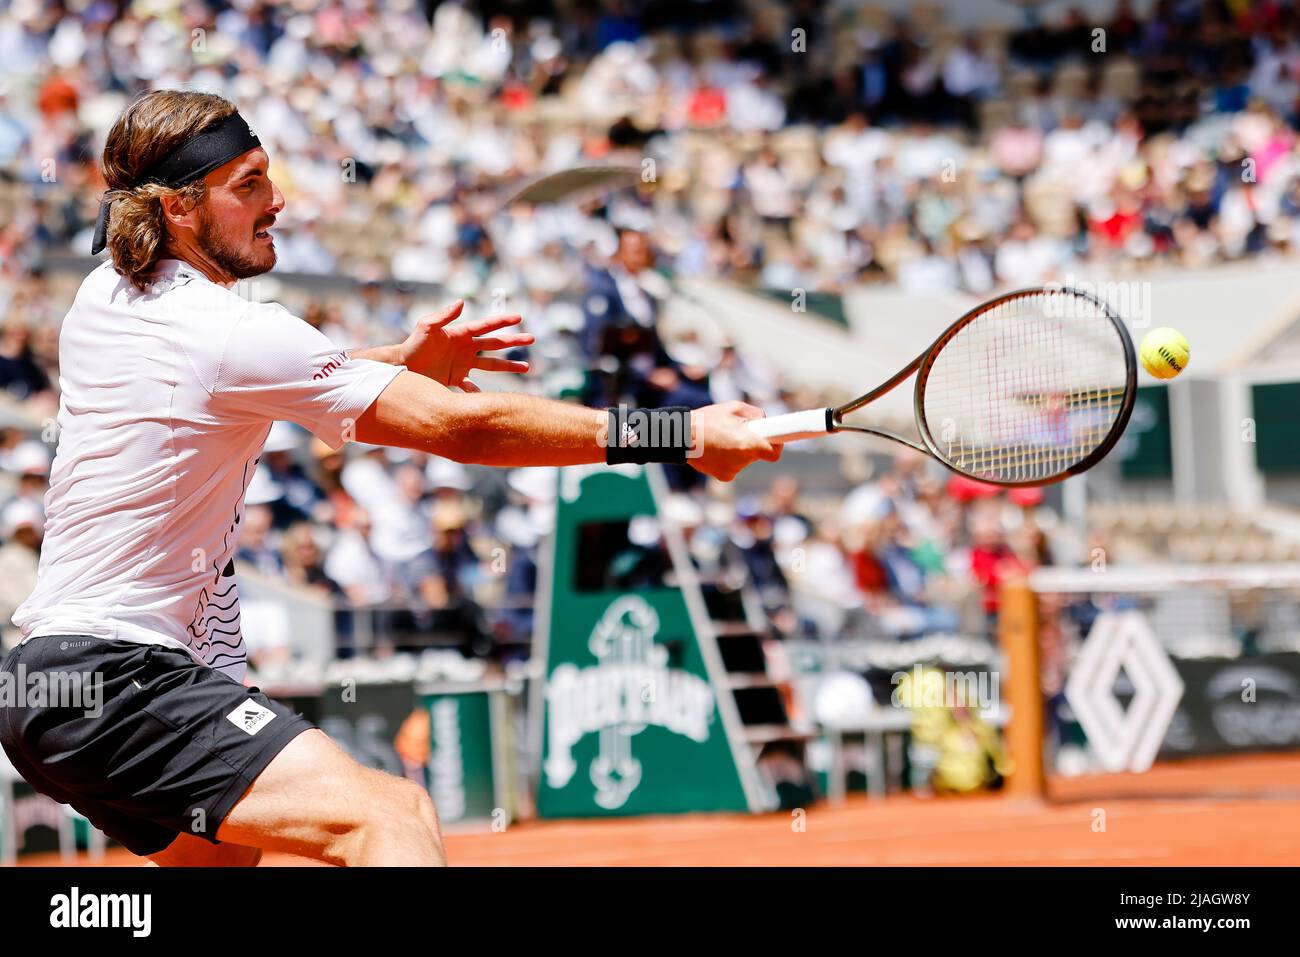 Paris, France. 30th May, 2022. Tennis player Stefanos Tsitsipas from Greece  is in action at the 2022 French Open Grand Slam tennis tournament in Roland  Garros, Paris, France. Frank Molter/Alamy Live news